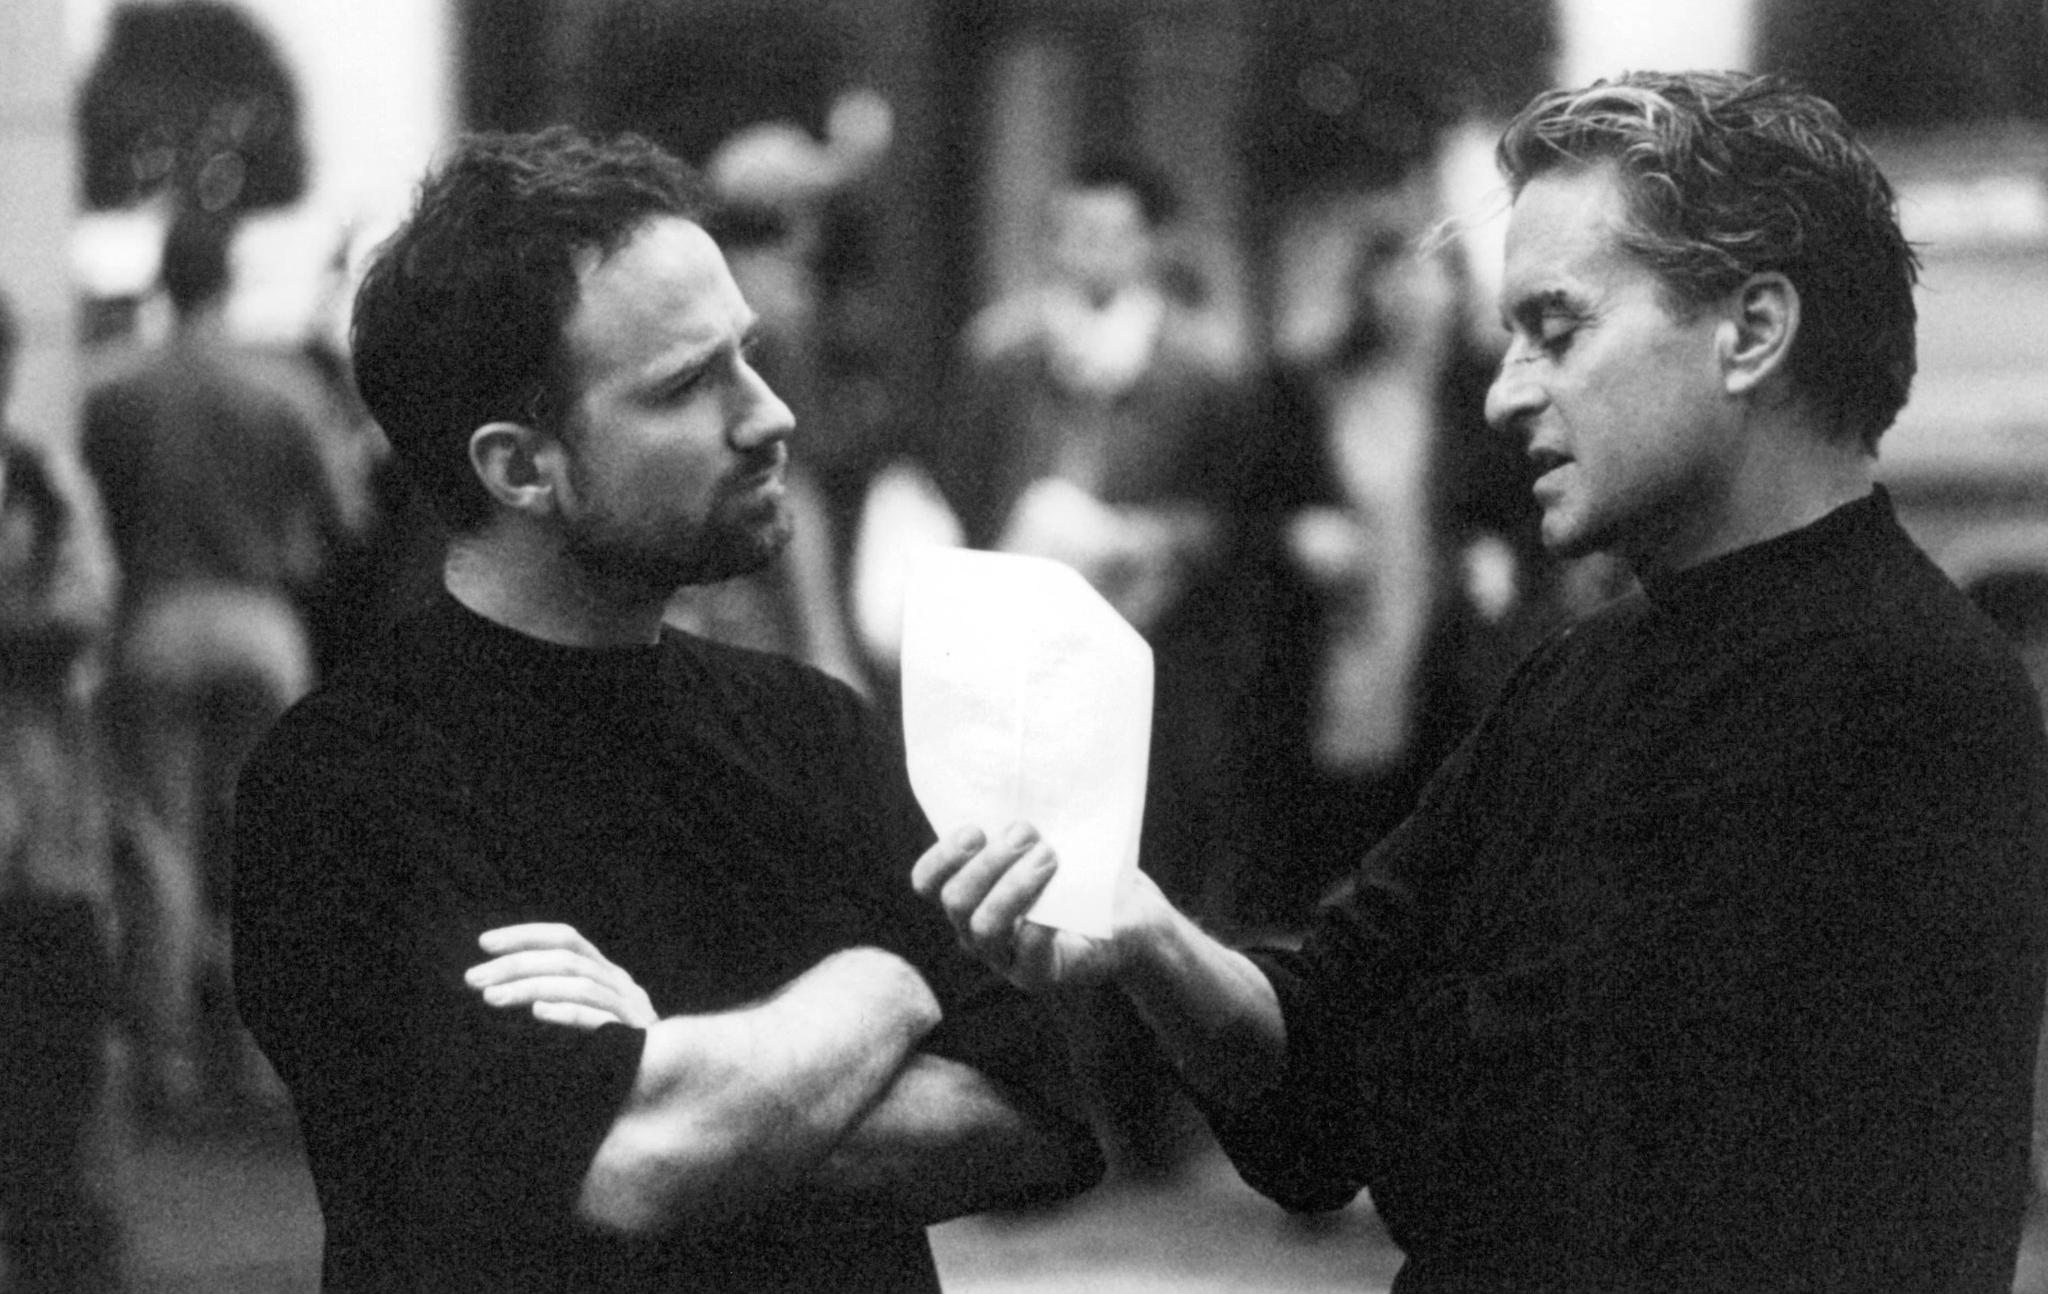 still-of-michael-douglas-and-david-fincher-in-the-game-_1997_-large-picture.jpg